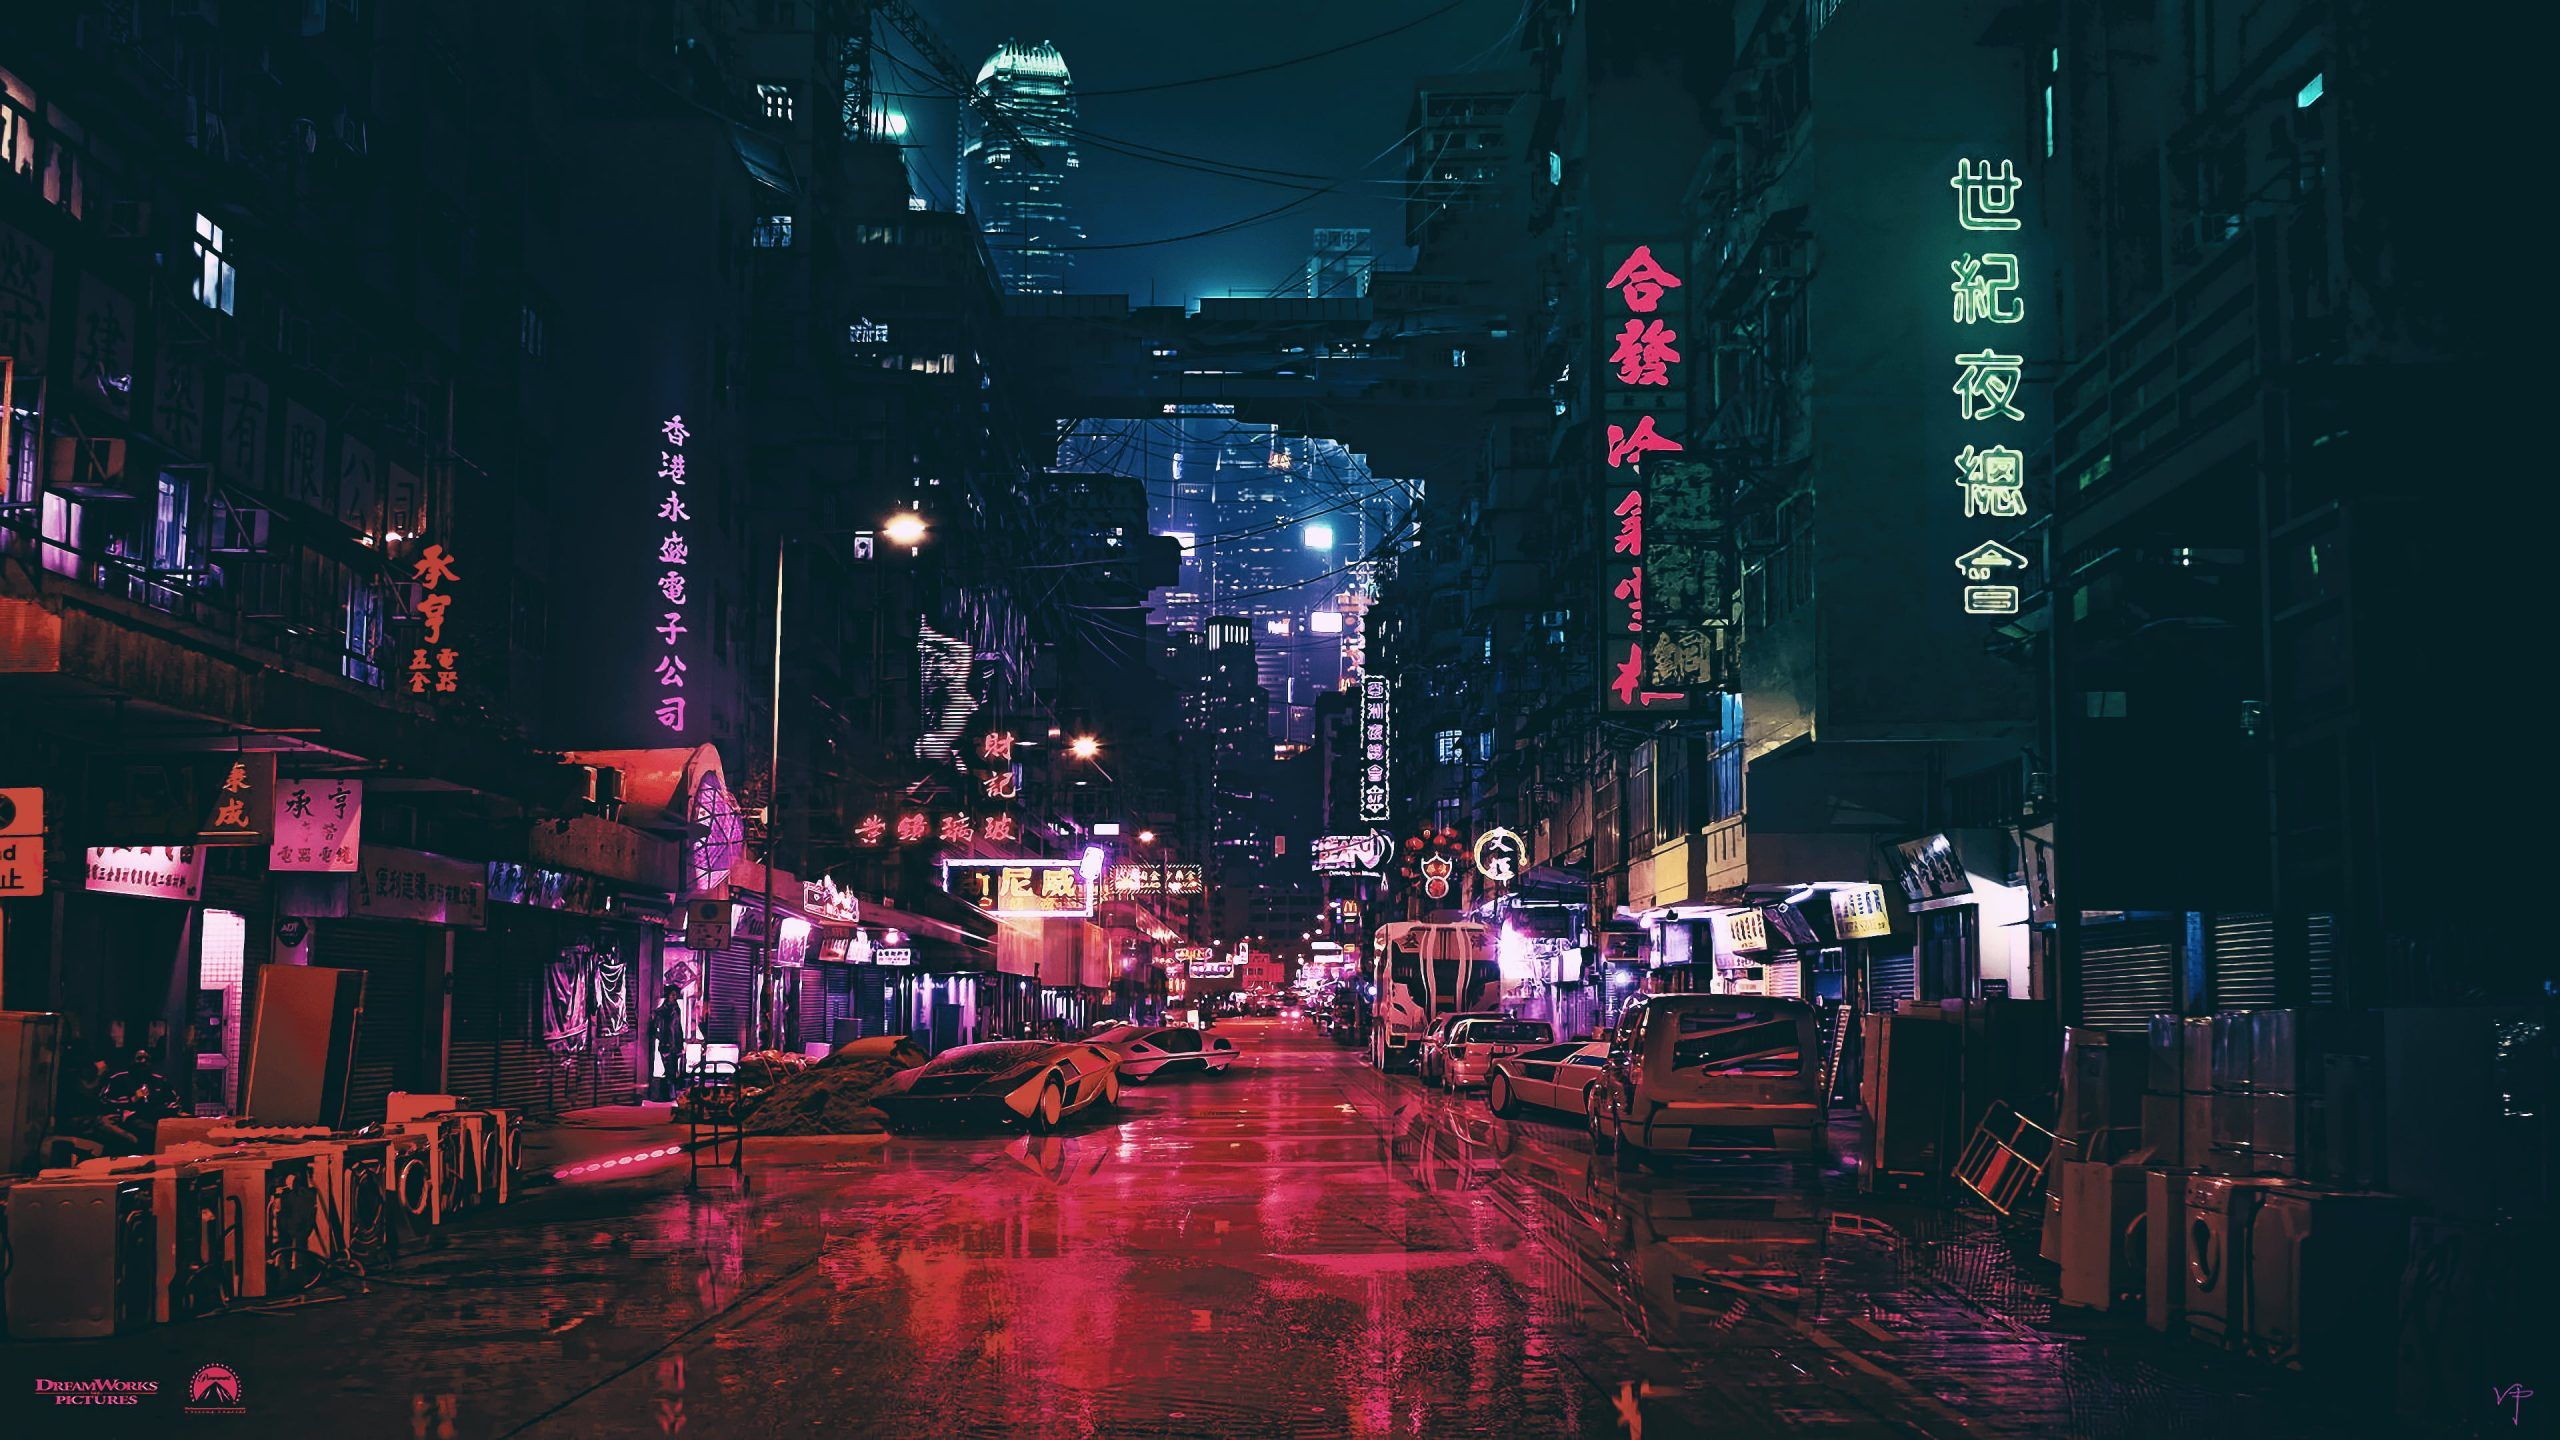 Neon Wallpaper • Wallpaper black signages, city roads with lightings and cars, night, artwork • Wallpaper For You The Best Wallpaper For Desktop & Mobile